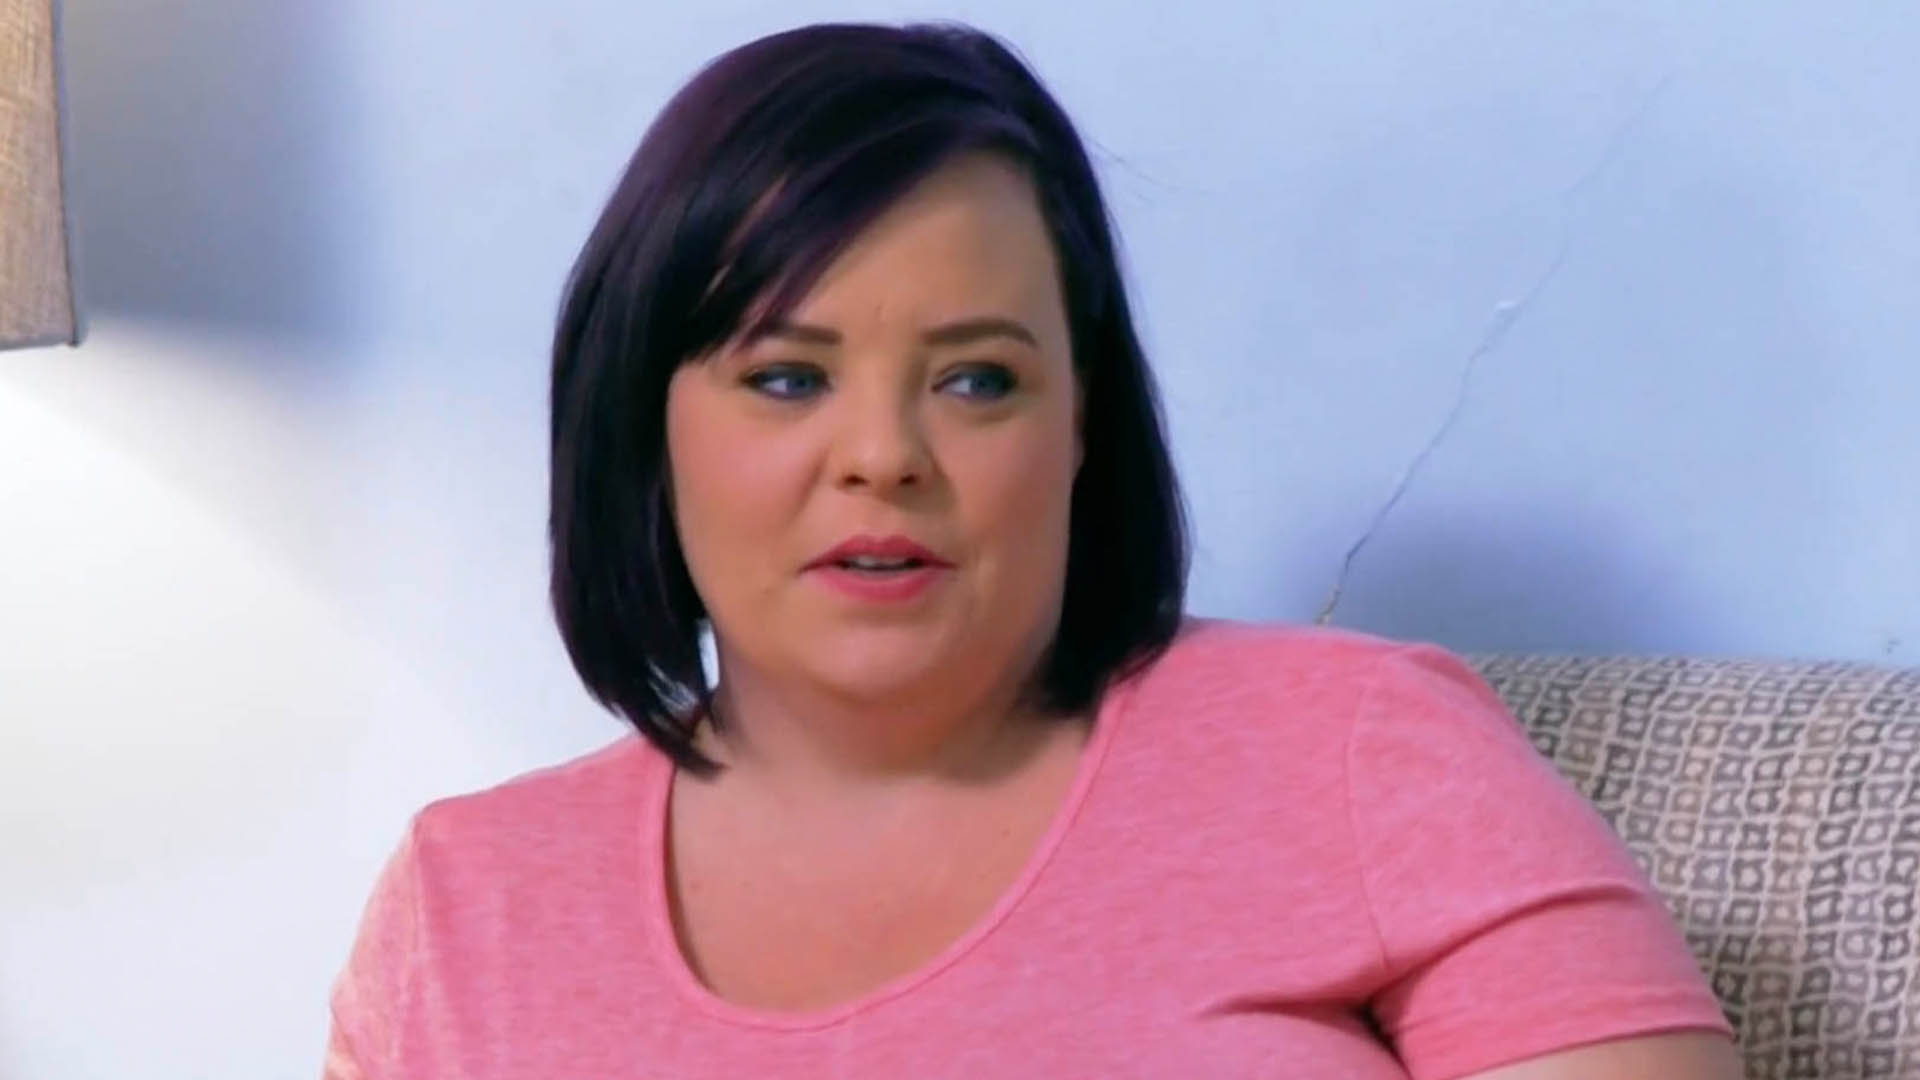 Teen Mom Catelynn Lowell slams Amber Portwood’s ‘undeserved’Custody loss is ‘wrong at many levels’ and she defends her costar